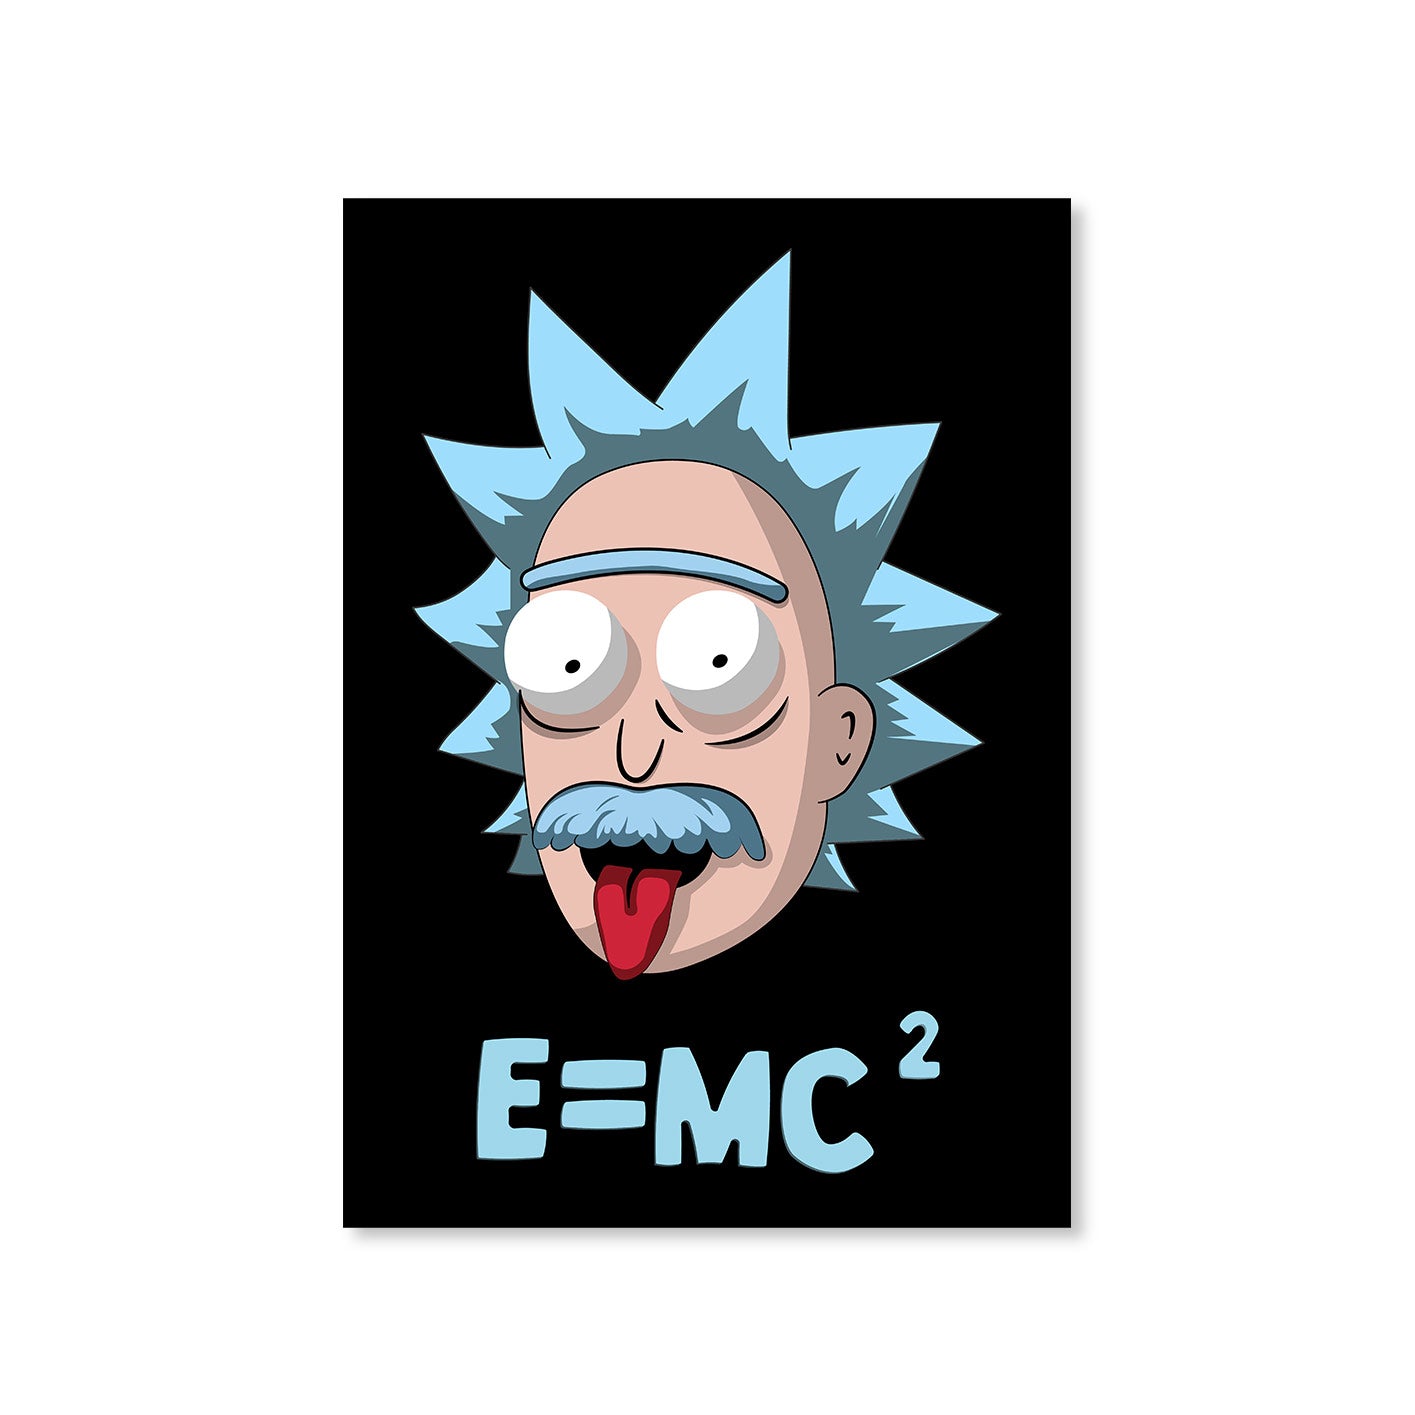 rick and morty genius poster wall art buy online united states of america usa the banyan tee tbt a4 rick and morty online summer beth mr meeseeks jerry quote vector art clothing accessories merchandise